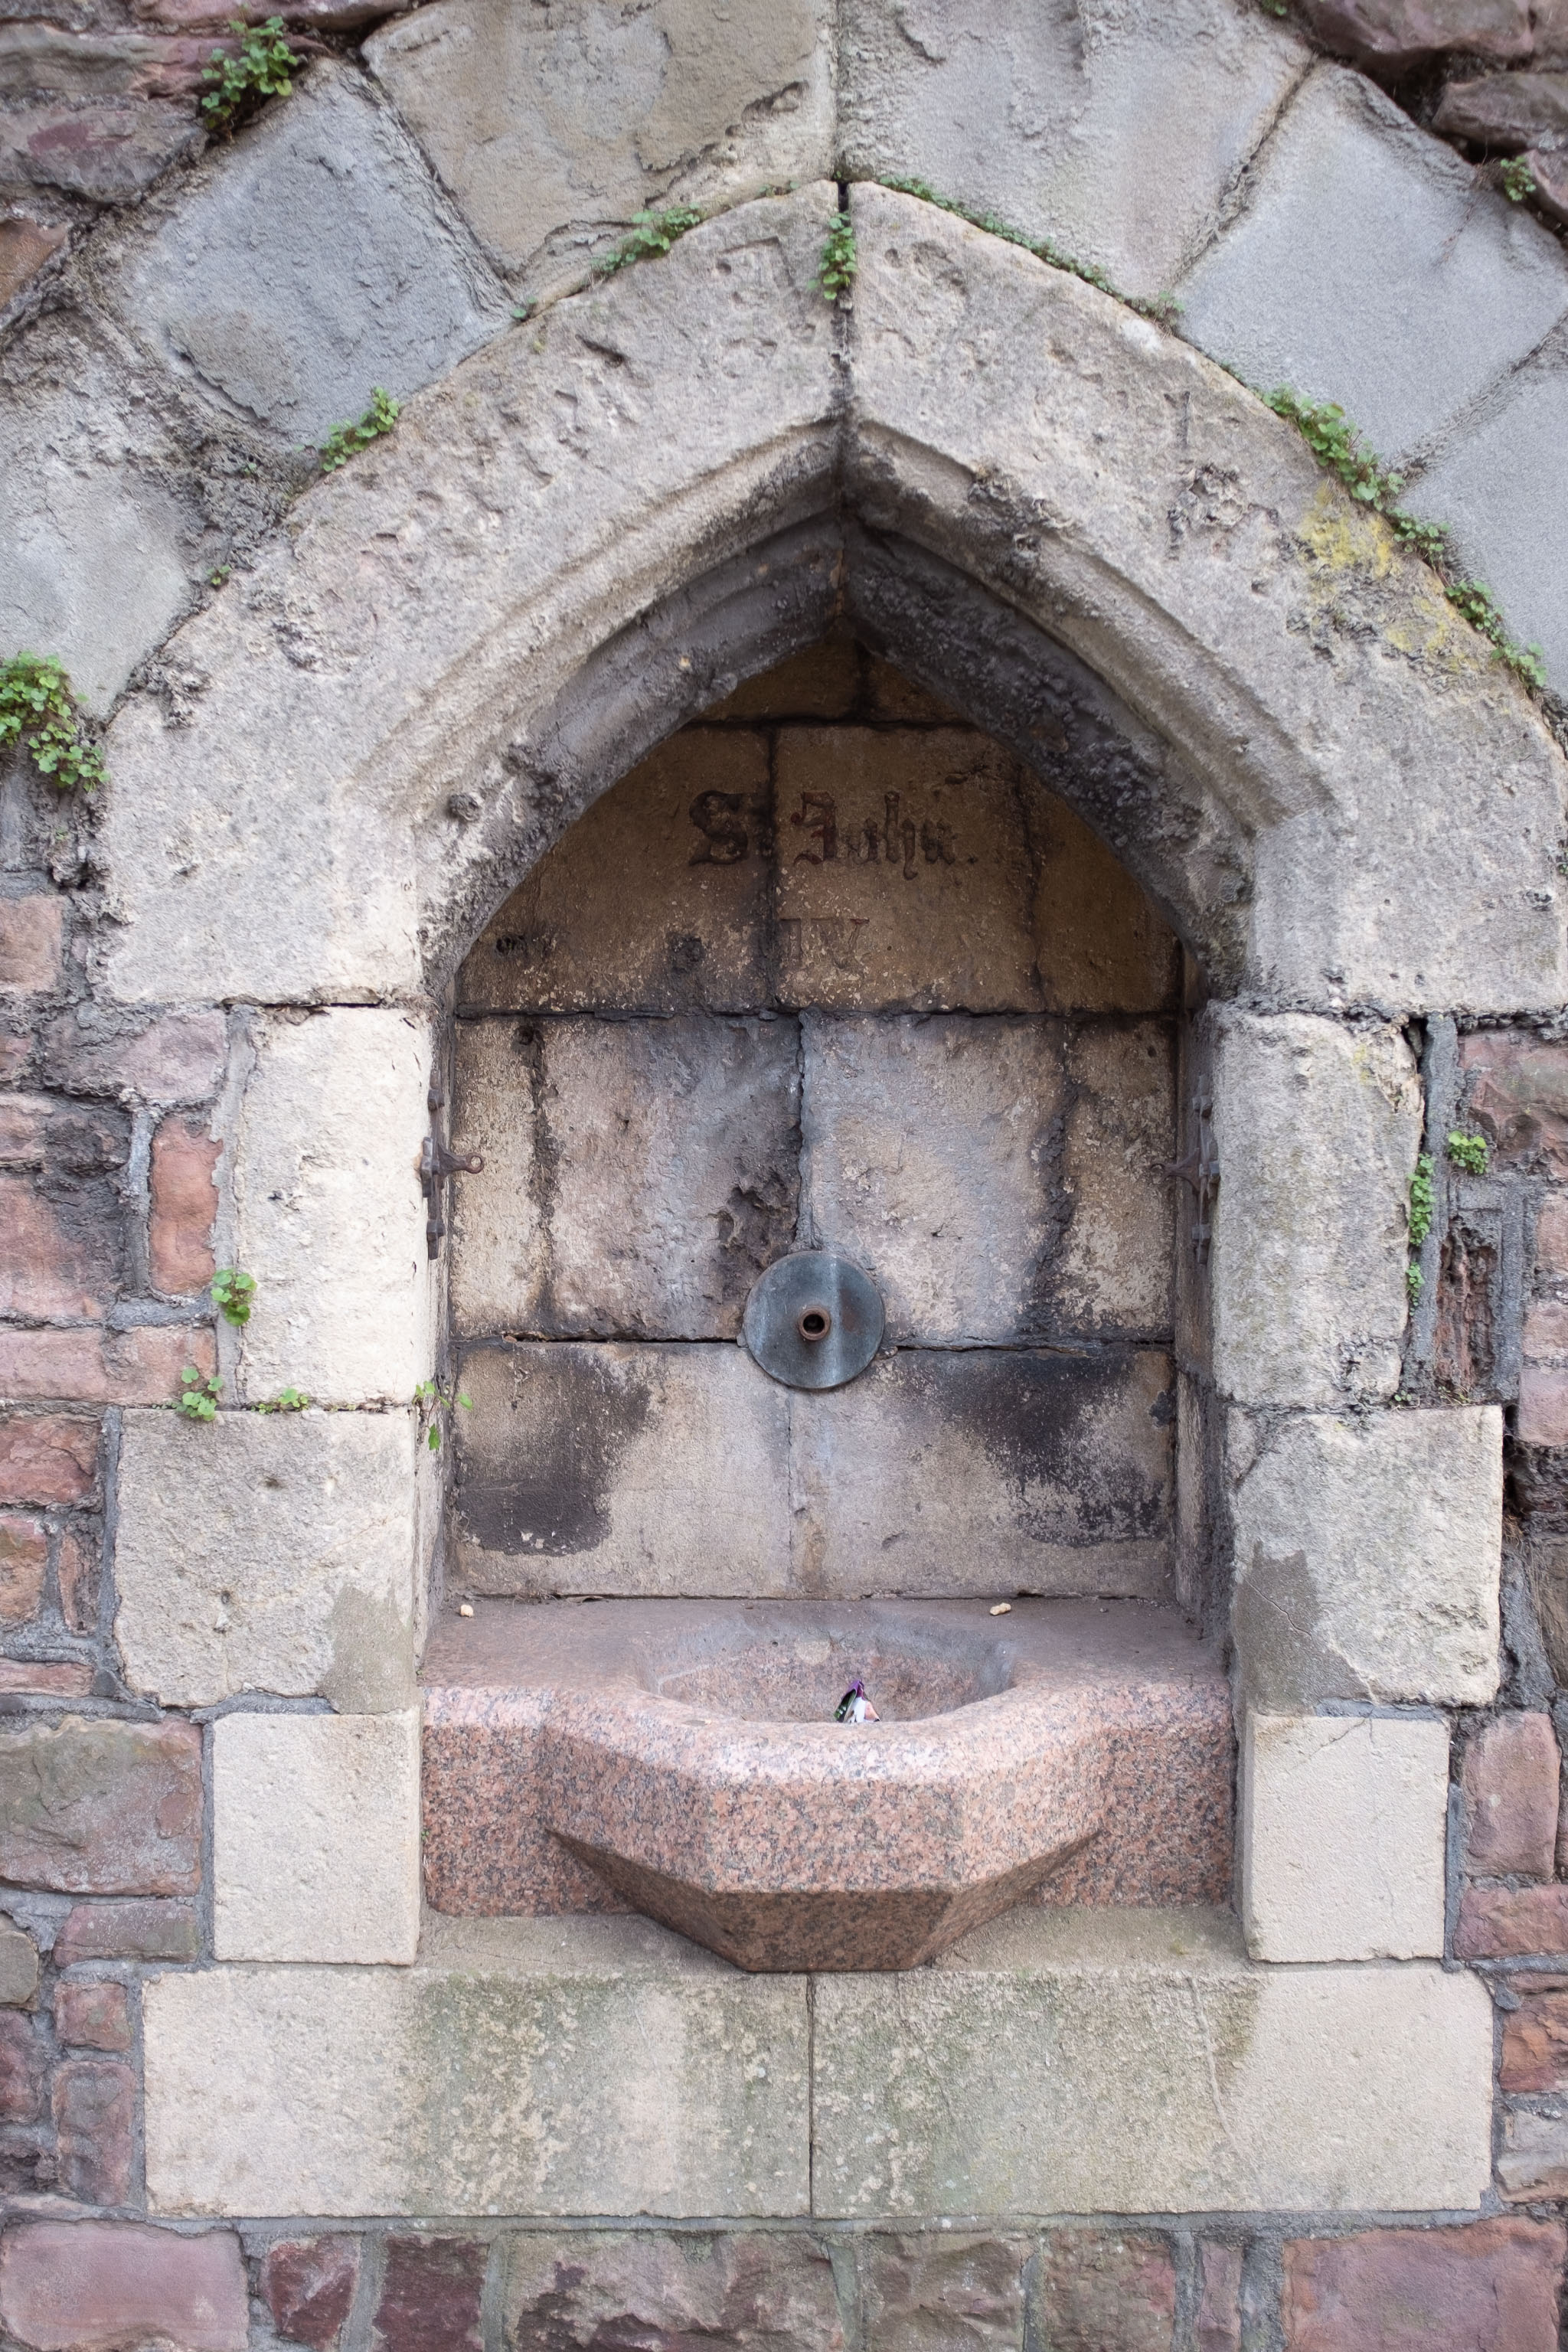 St John's Drinking Fountain
According to the Whitley Pump (twinned with St John's Conduit!) website:

Carmelite monks constructed St John’s Conduit, to carry water from the ne...